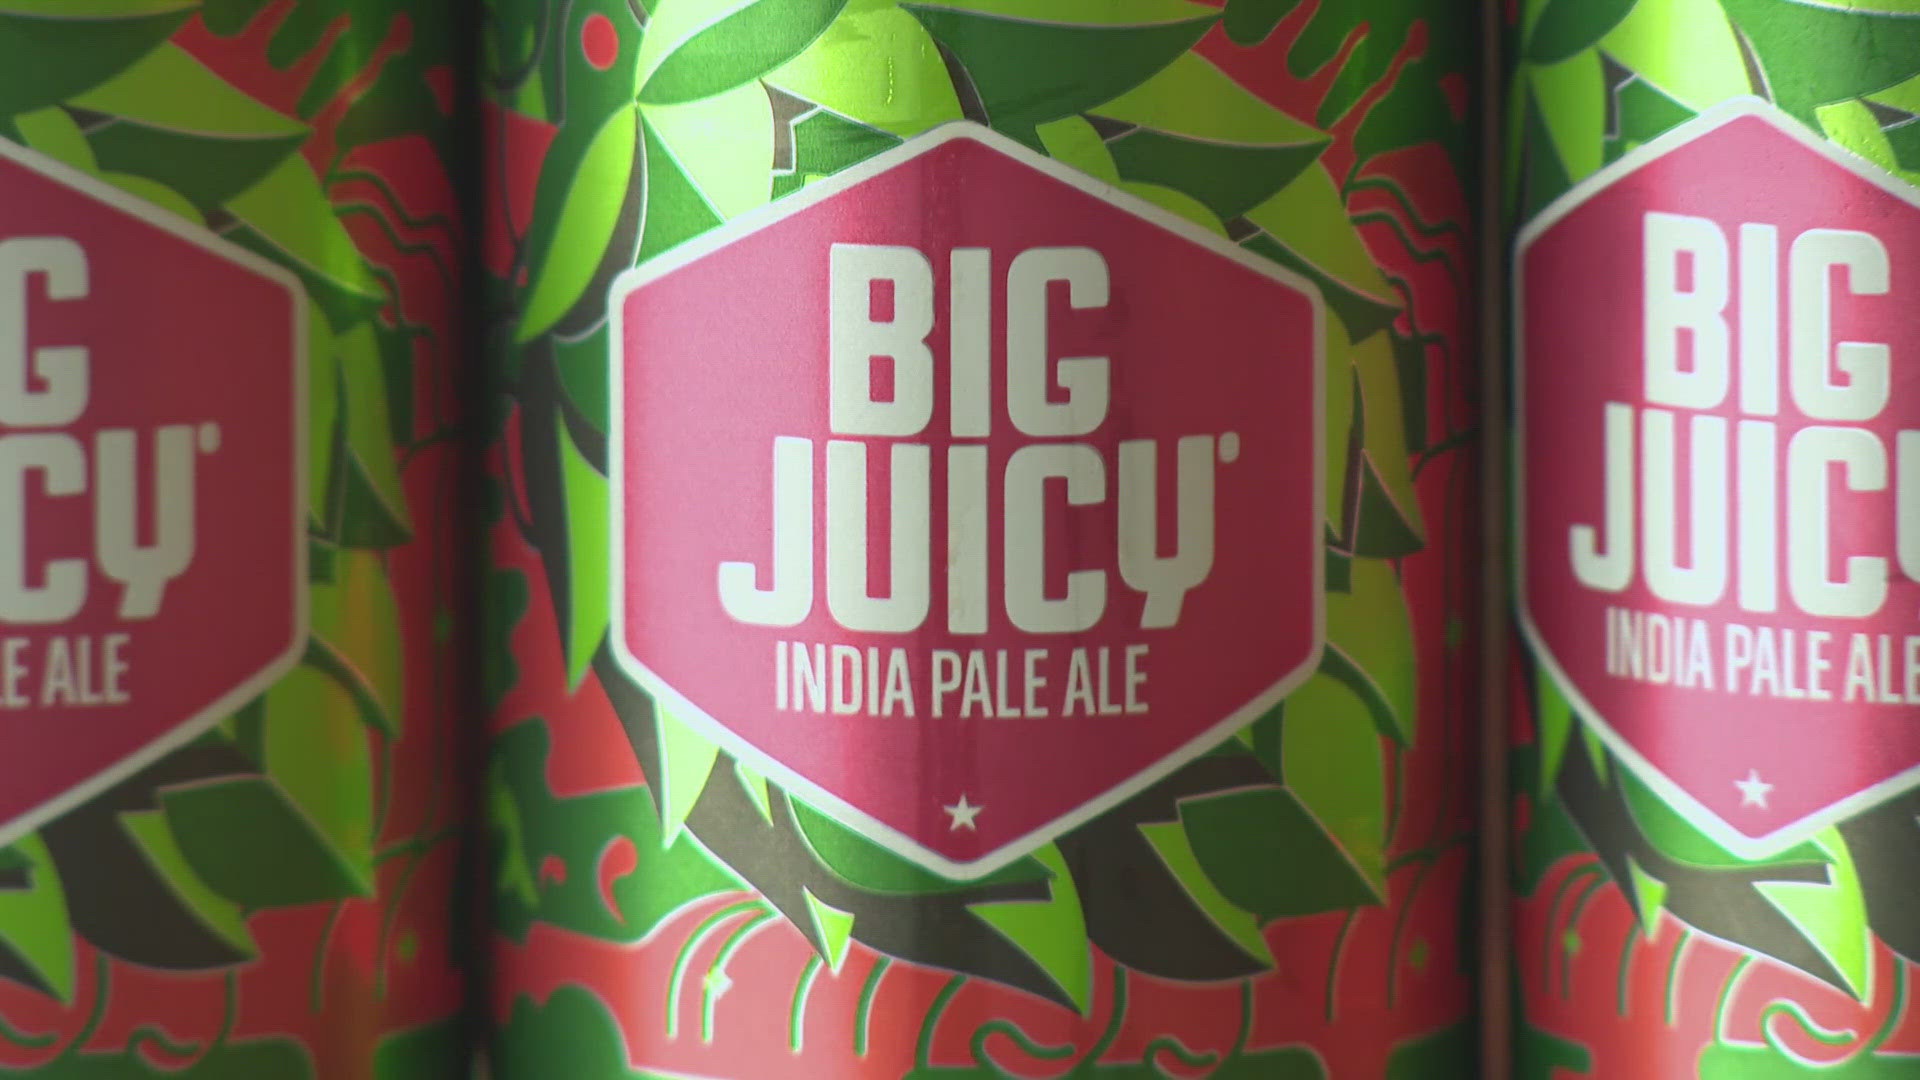 No-Li is suing Seattle-based Redhook brewery for infringing on their trademarked 'Big Juicy' beer.